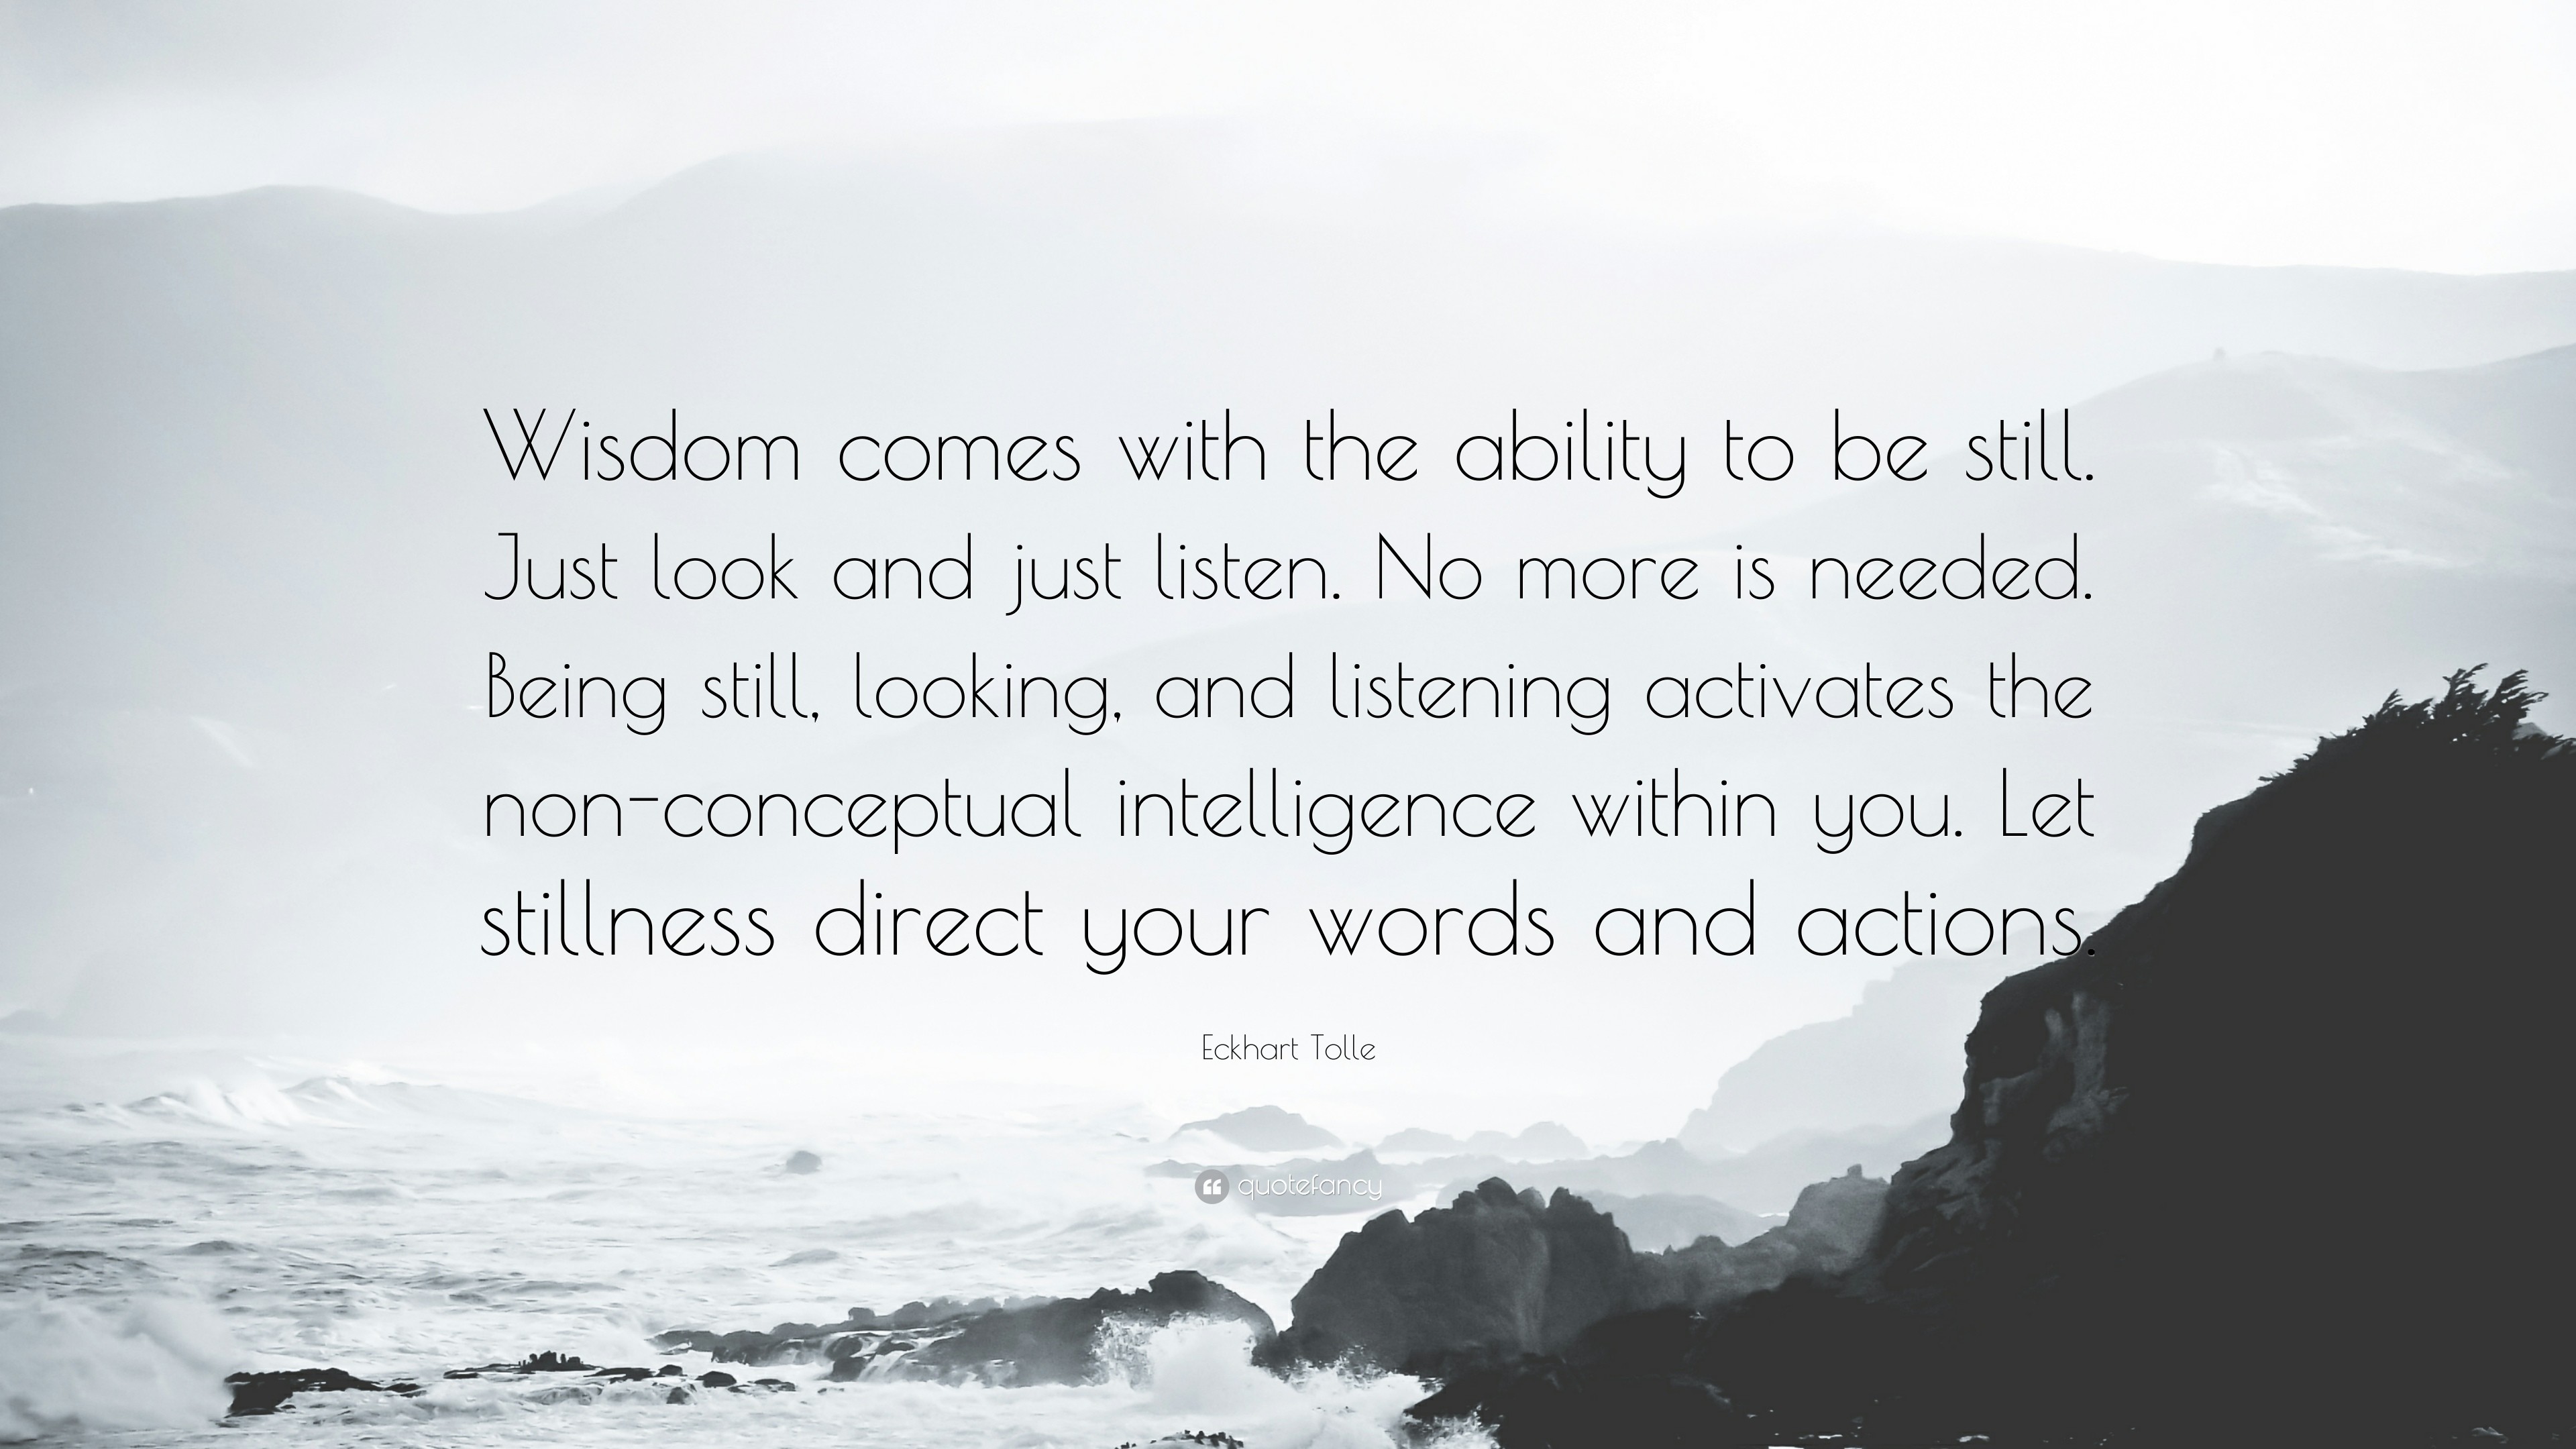 3840x2160 Eckhart Tolle Quote: “Wisdom comes with the ability to be still. Just look